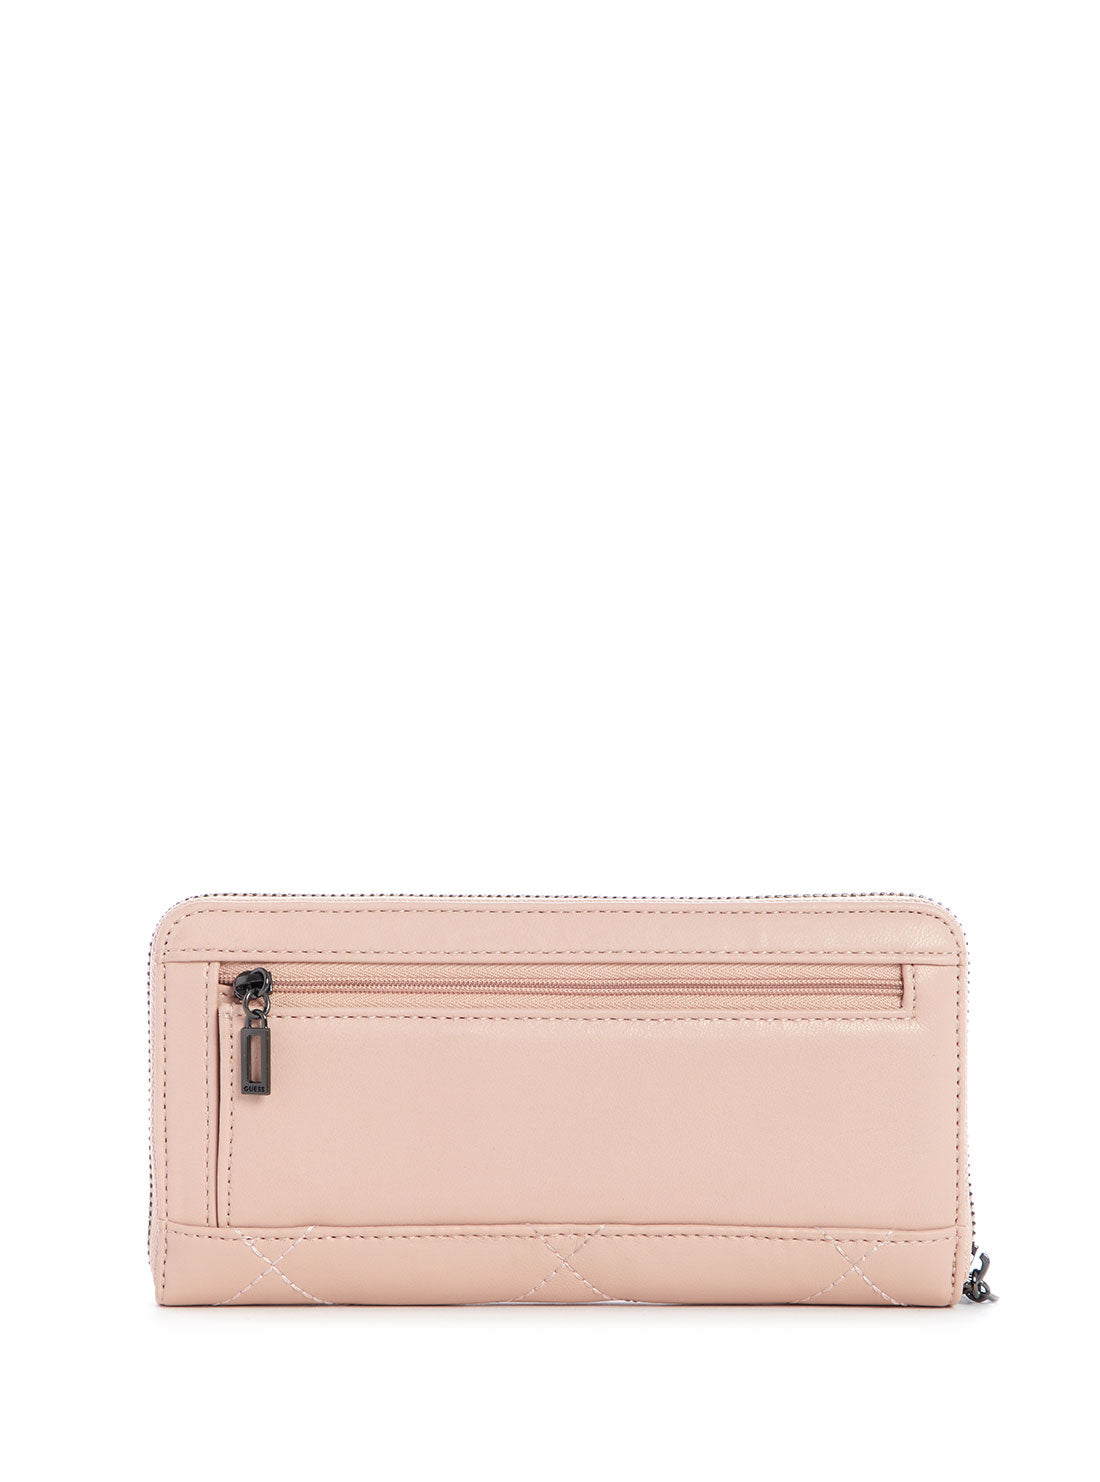 GUESS Womens Blush Pink Quilted Khatia Large Wallet QM838146 Back View